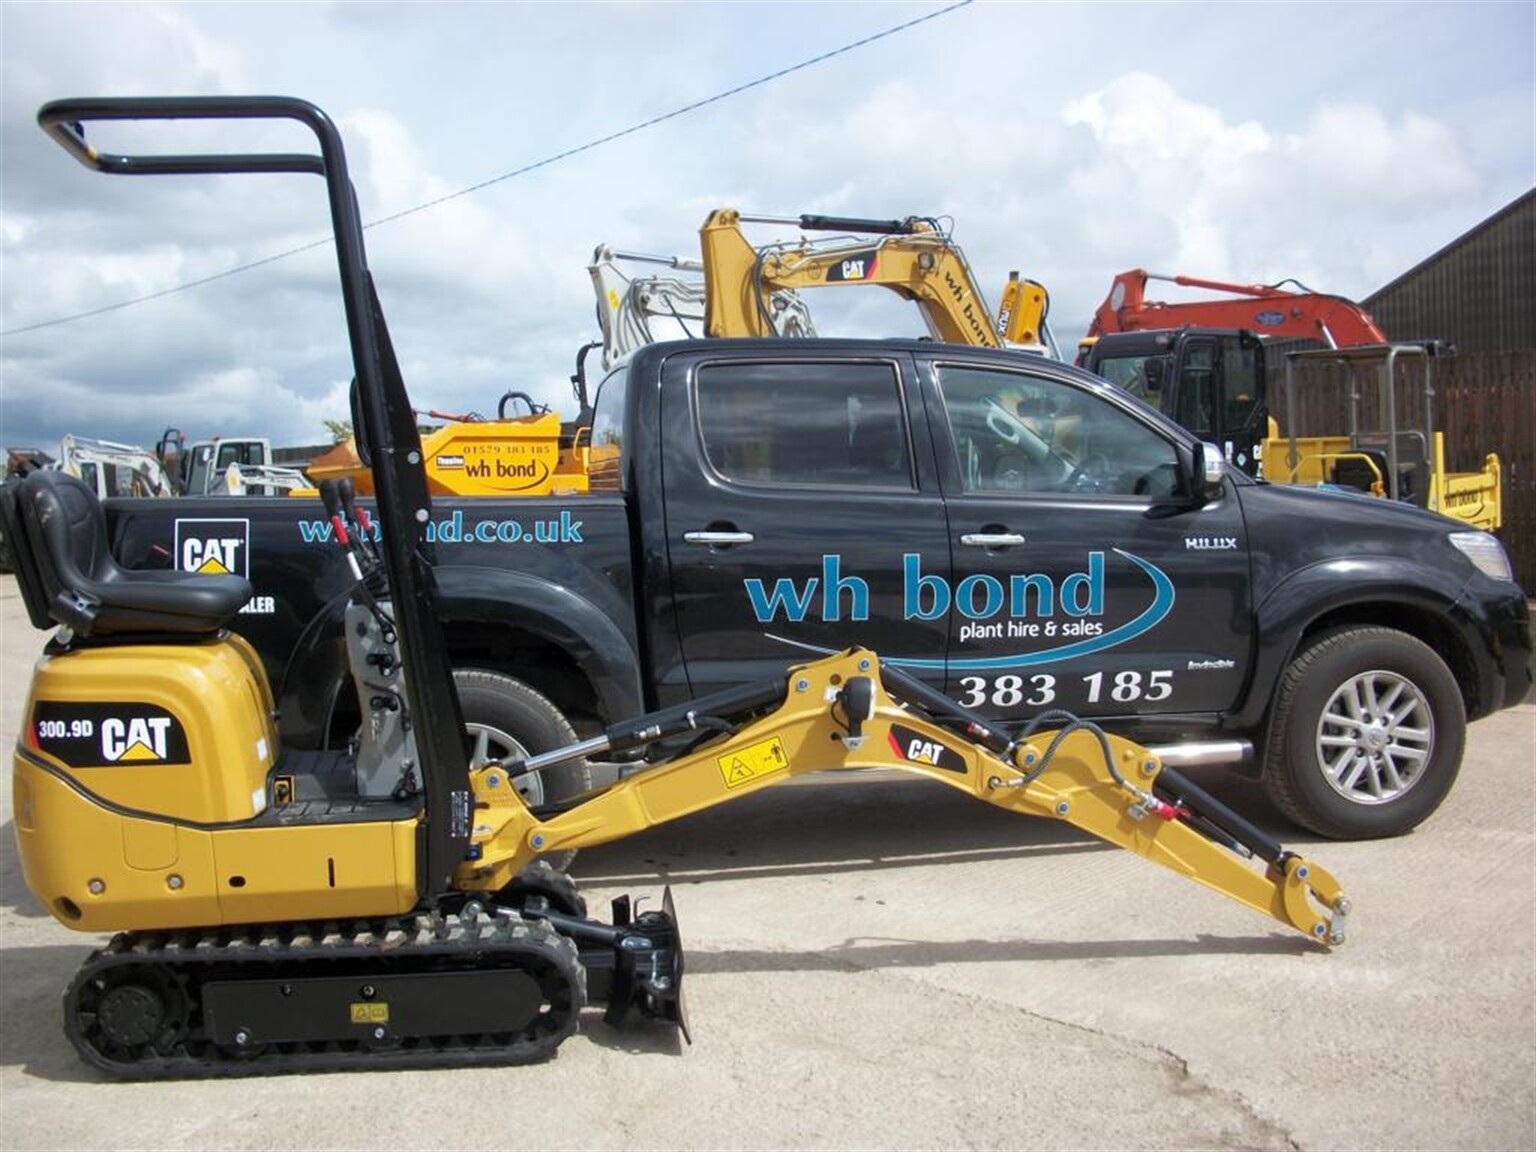 Win your own Cat 300.9D mini excavator with WH Bond